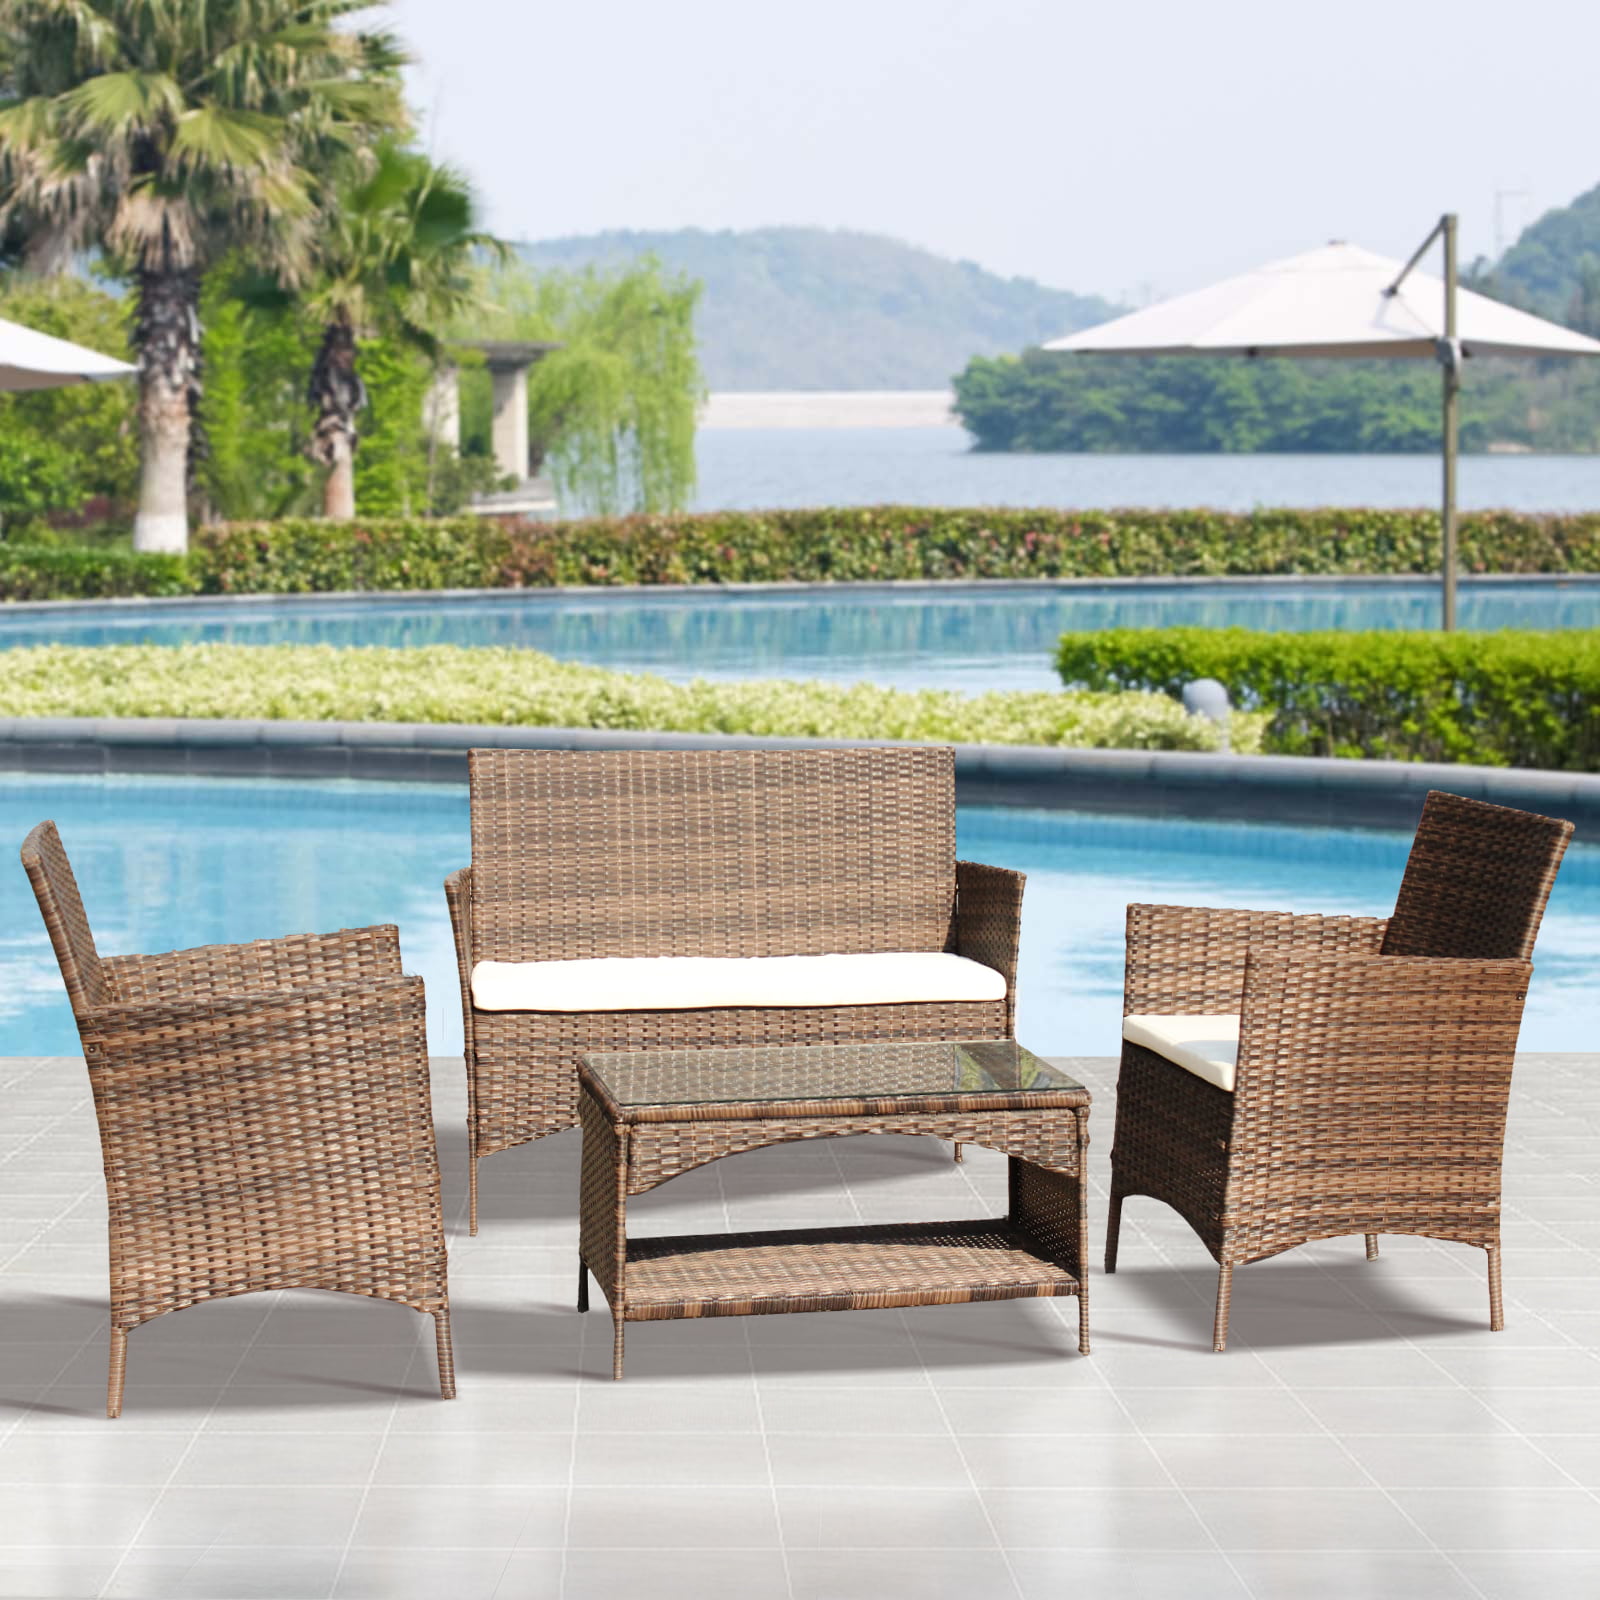 Clearance! 4 PC Rattan Patio Furniture Set, Wicker Bar Set with 2pcs